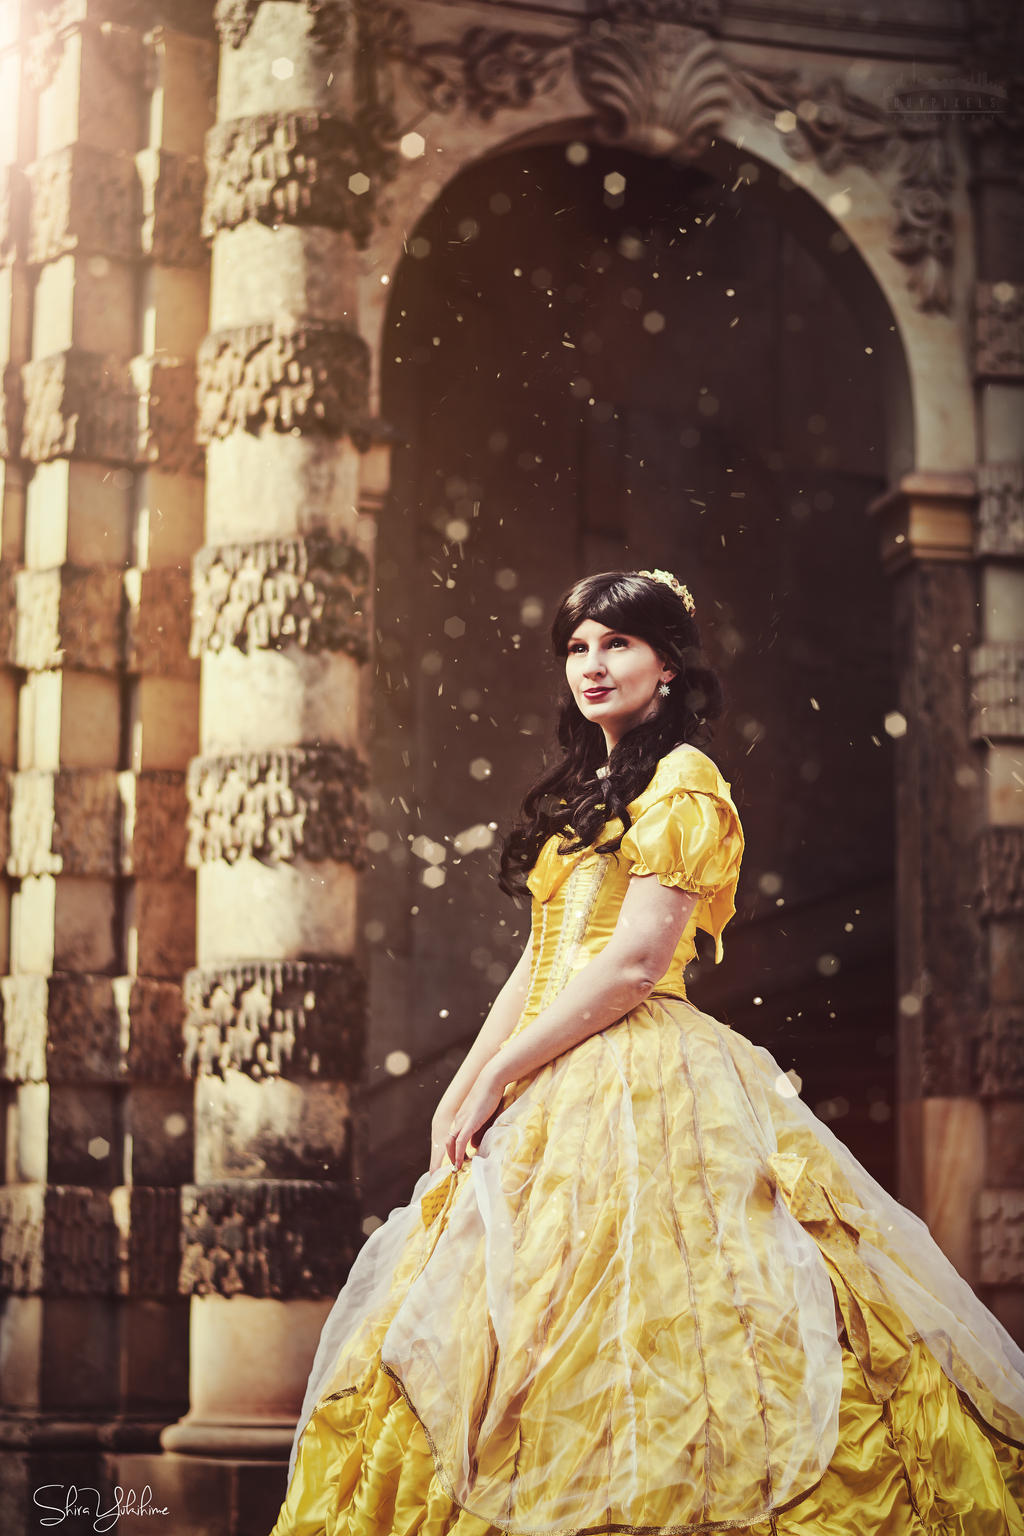 Belle Beauty and the Beast by Shira-Cosplay on DeviantArt